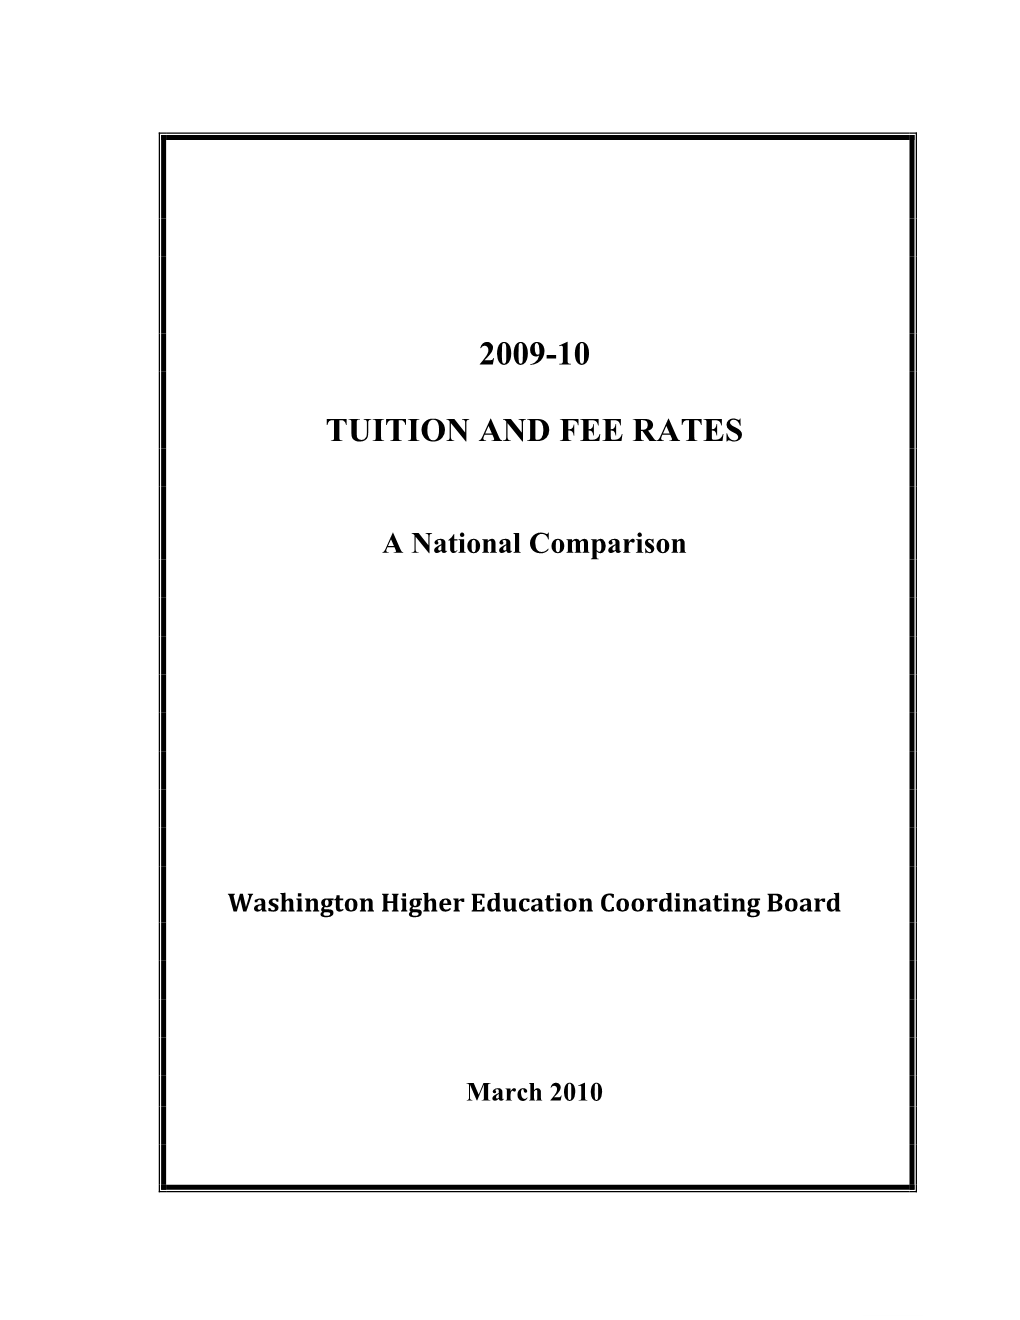 2009-10 Tuition and Fee Rates a National Comparison